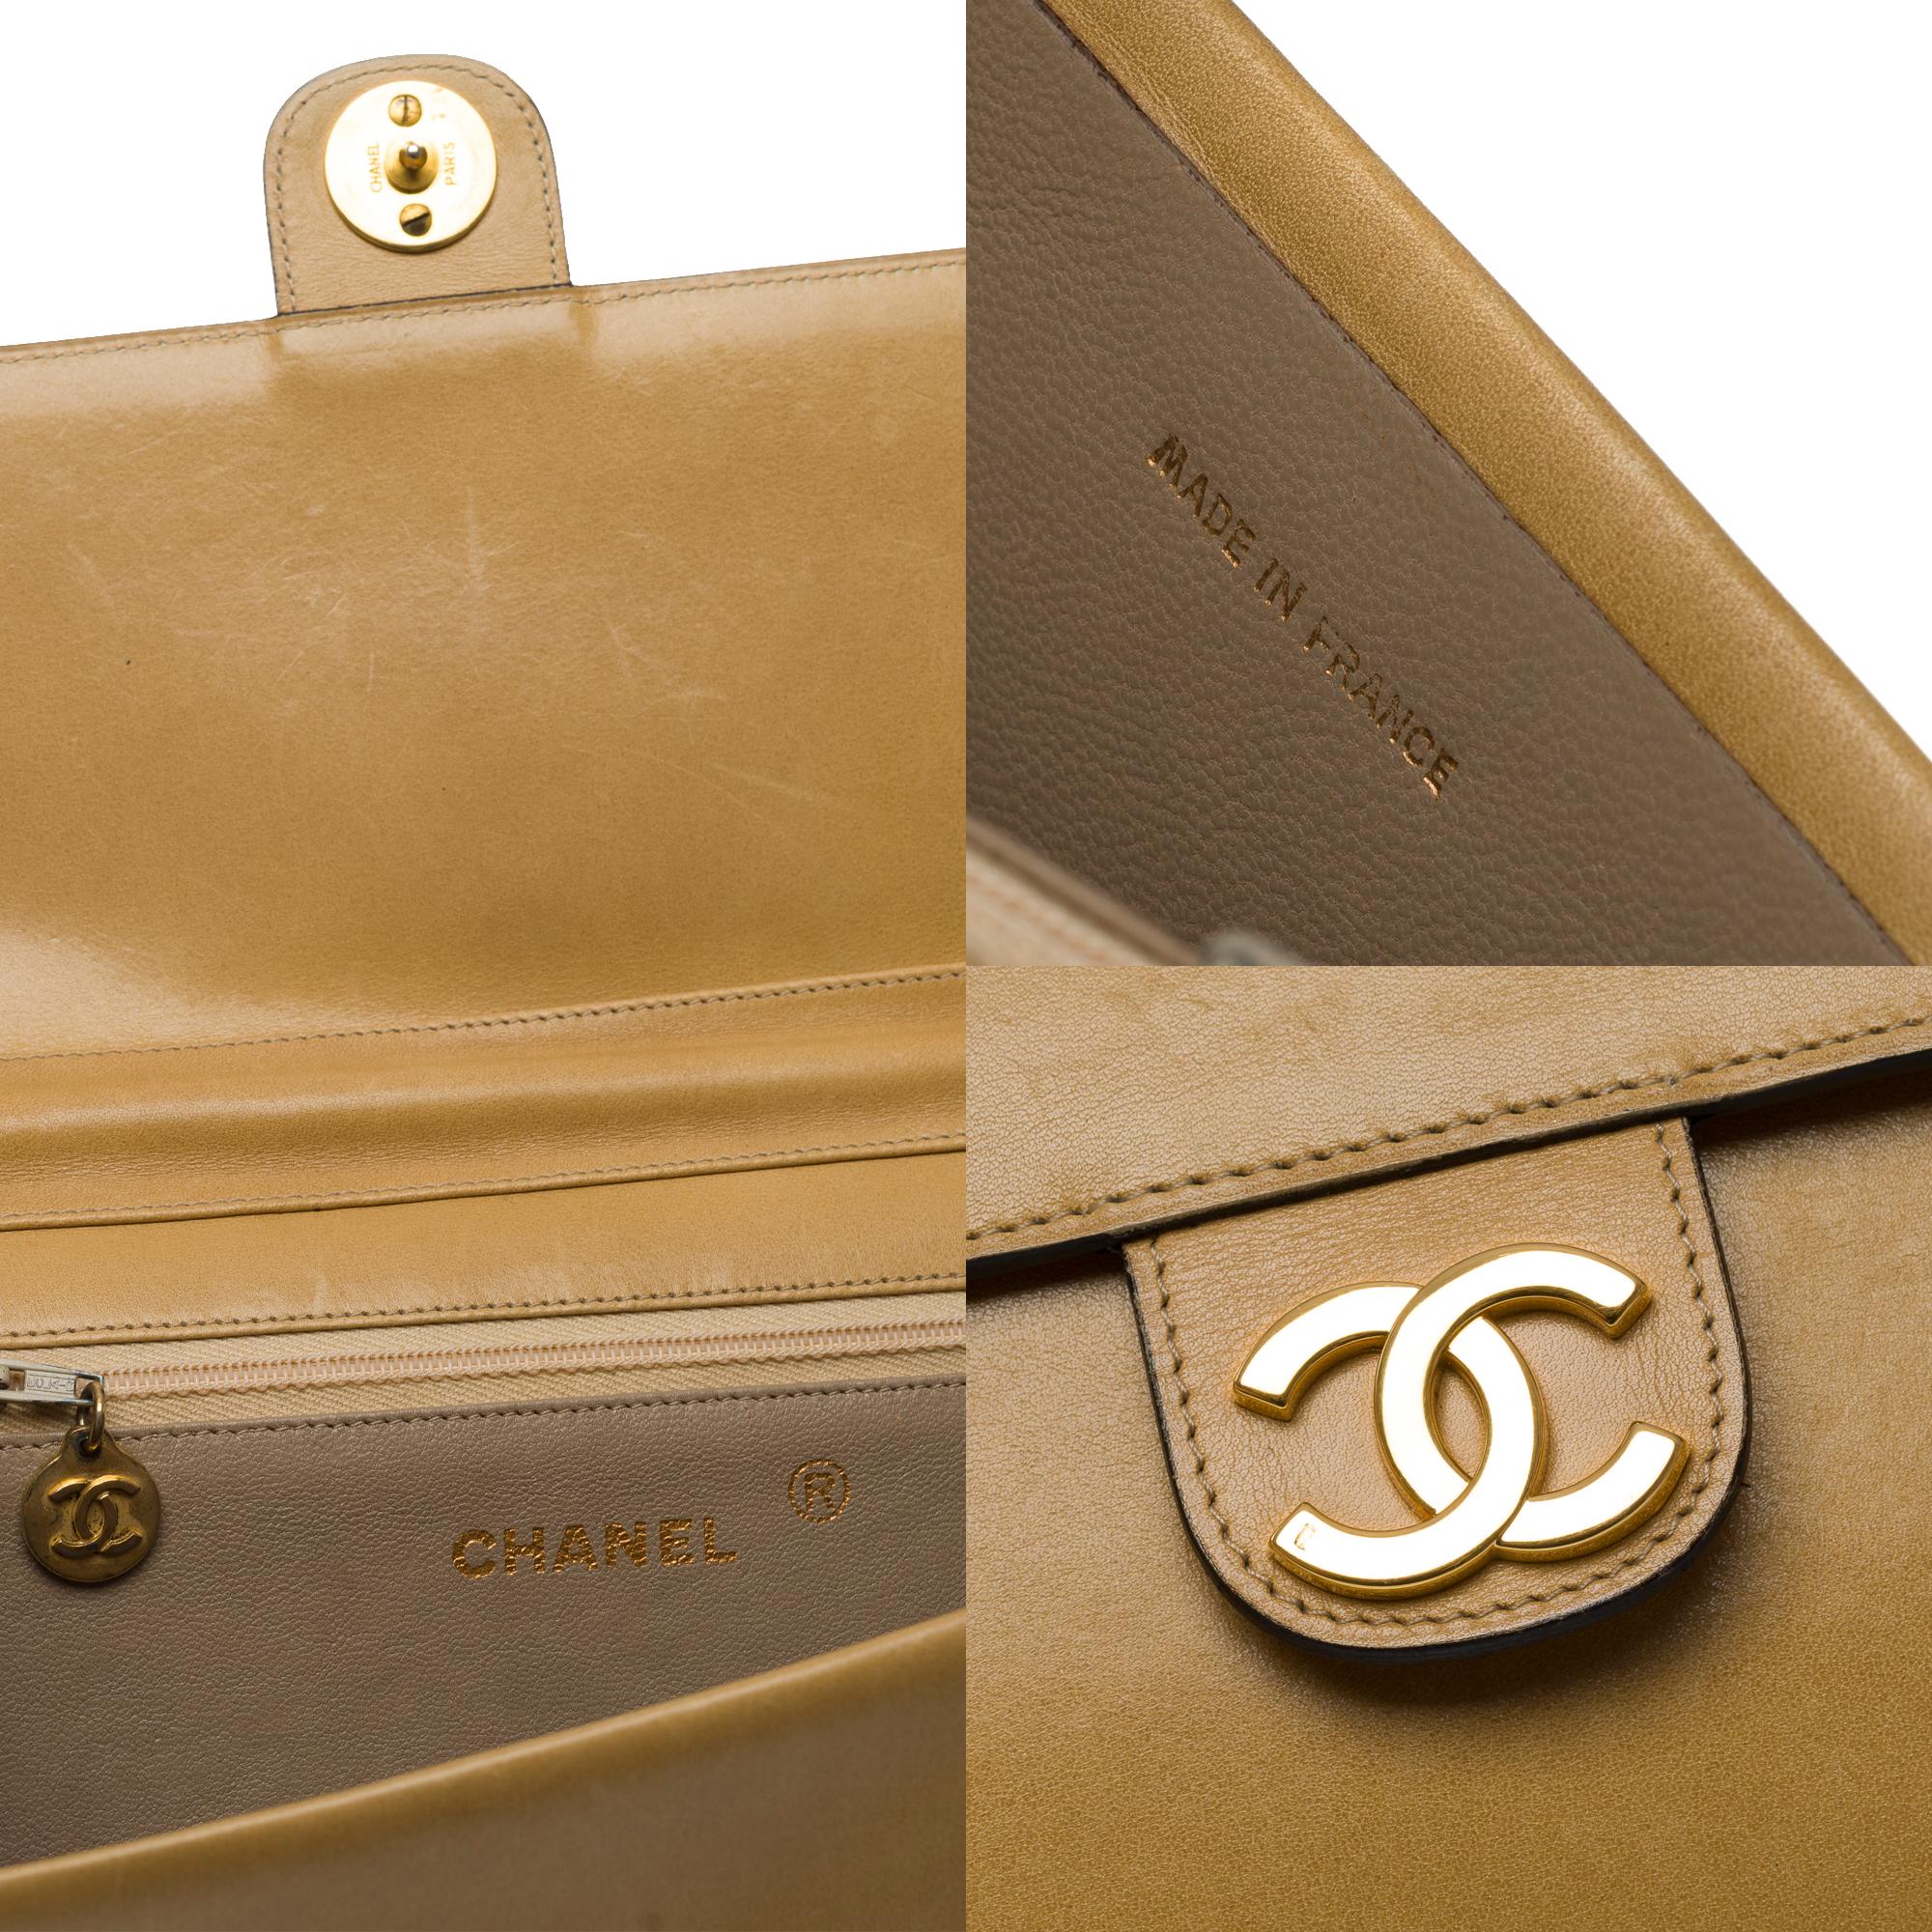 Gorgeous Chanel Classic shoulder flap bag in beige box calfskin leather, GHW For Sale 2